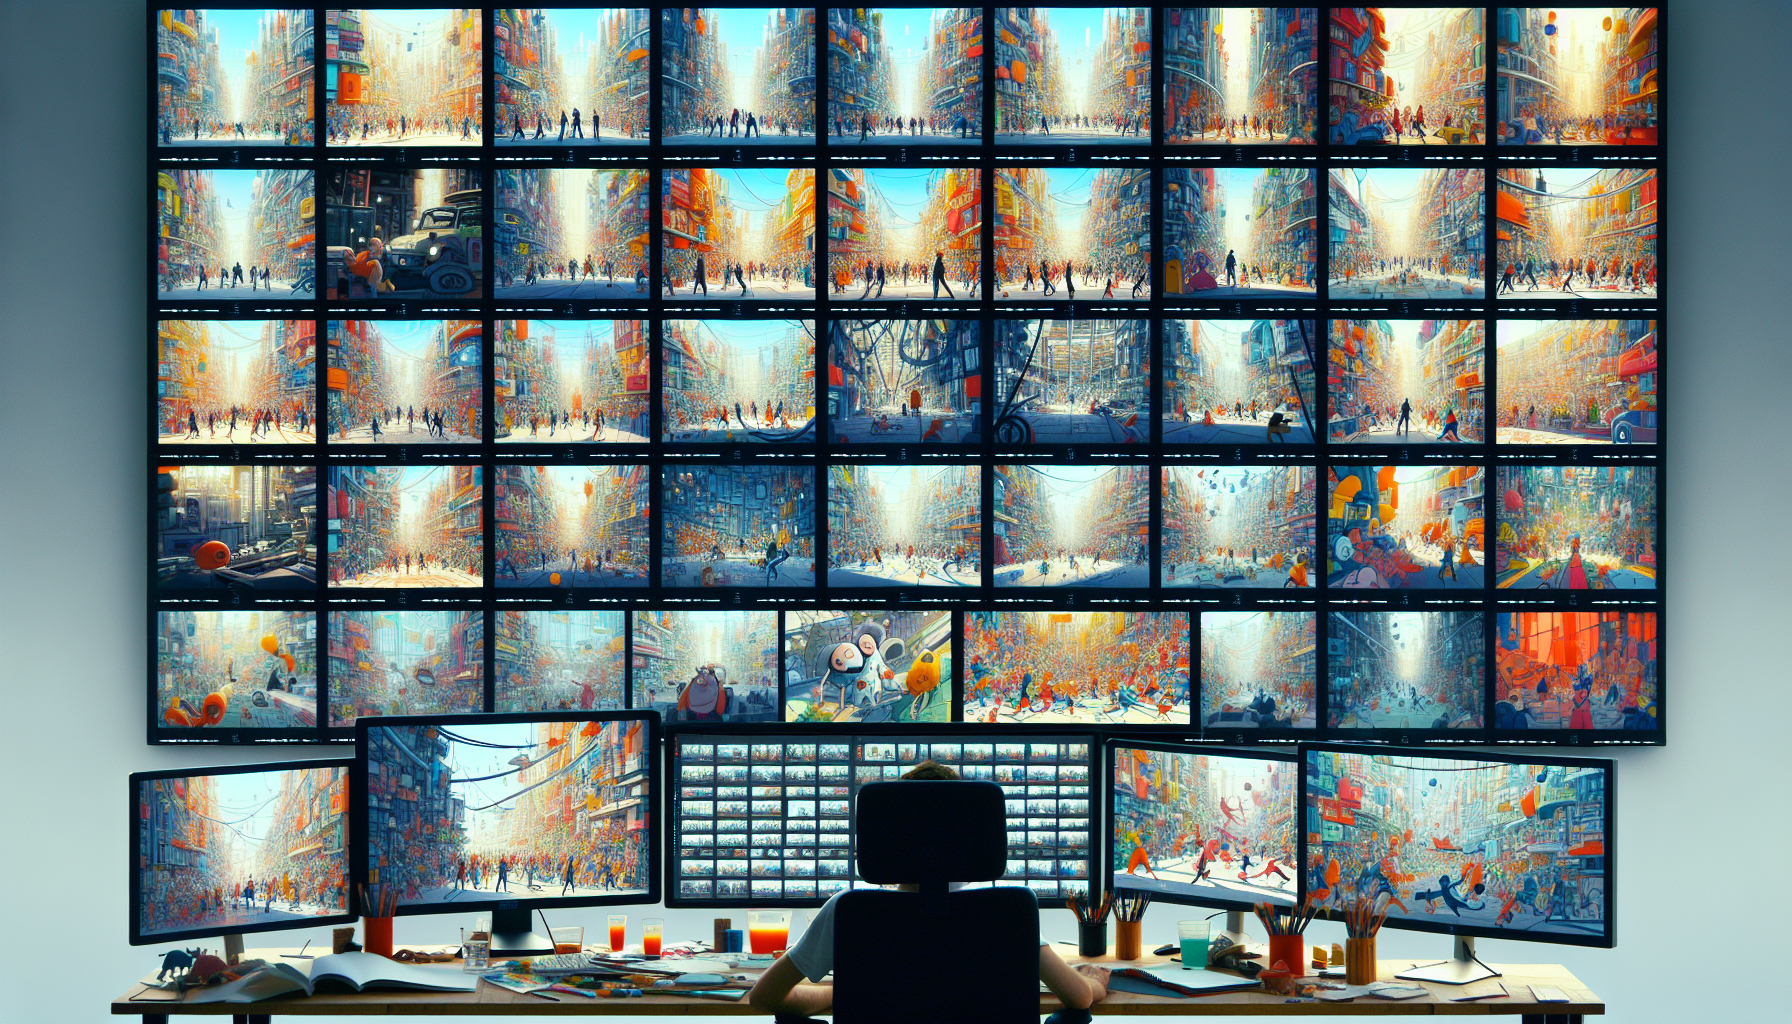 An artist's studio filled with multiple screens, each displaying different stages of a complex ensemble movie animation, showcasing a diverse array of dynamic characters interacting in a vibrantly col